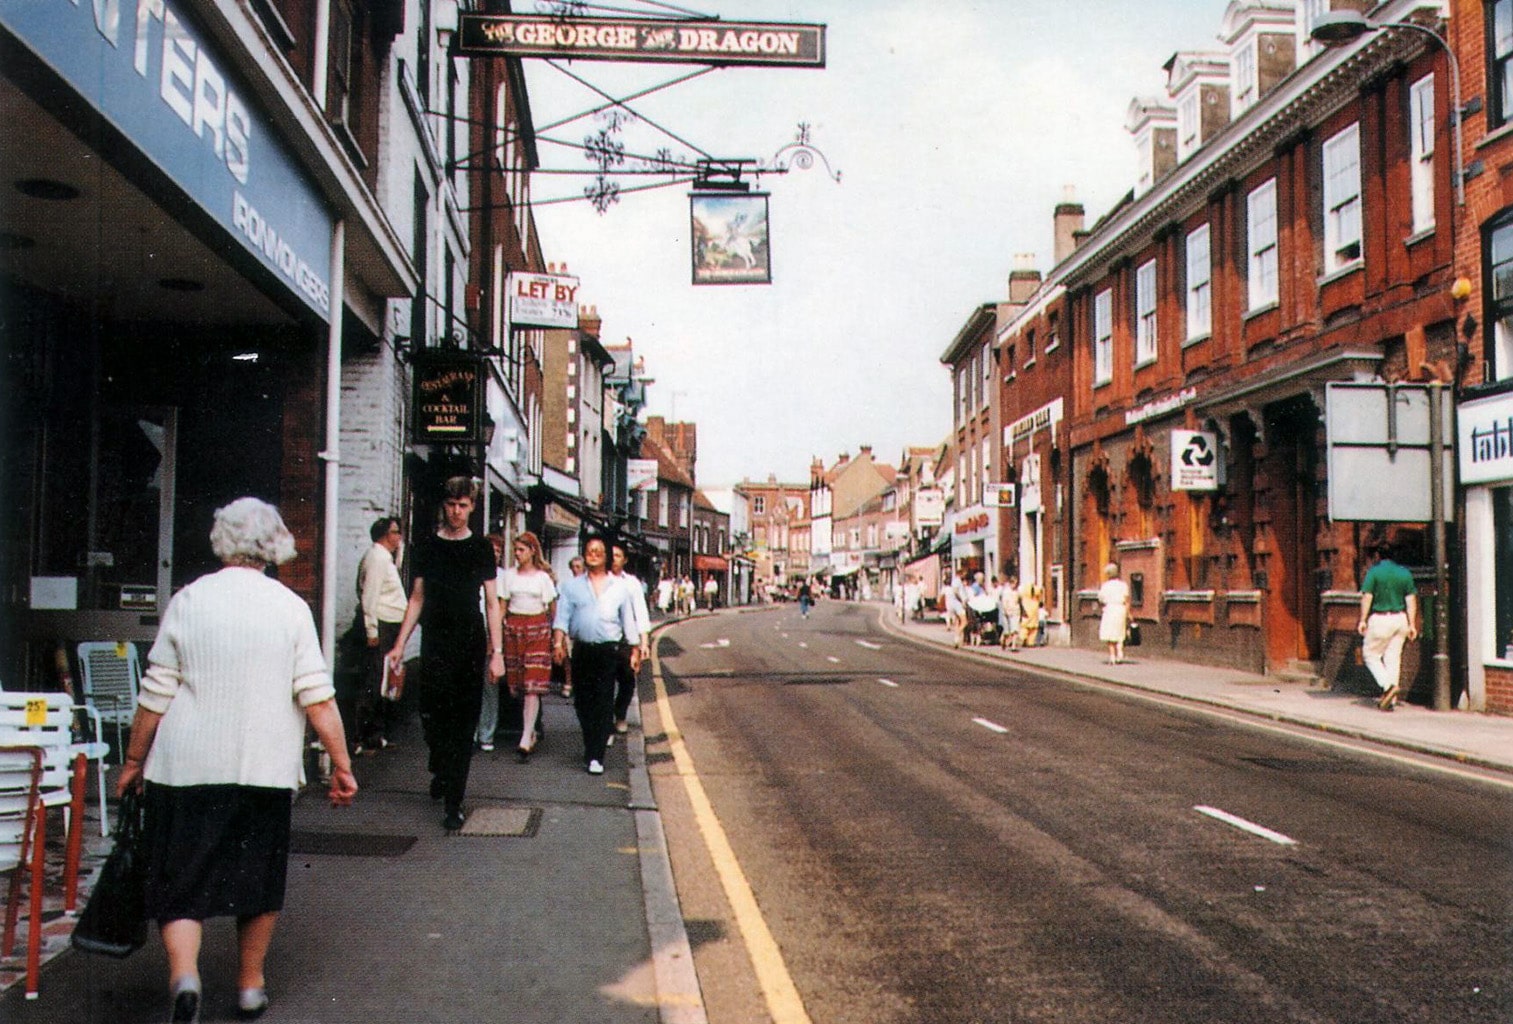 Chesham main shopping street with a road running down the middle